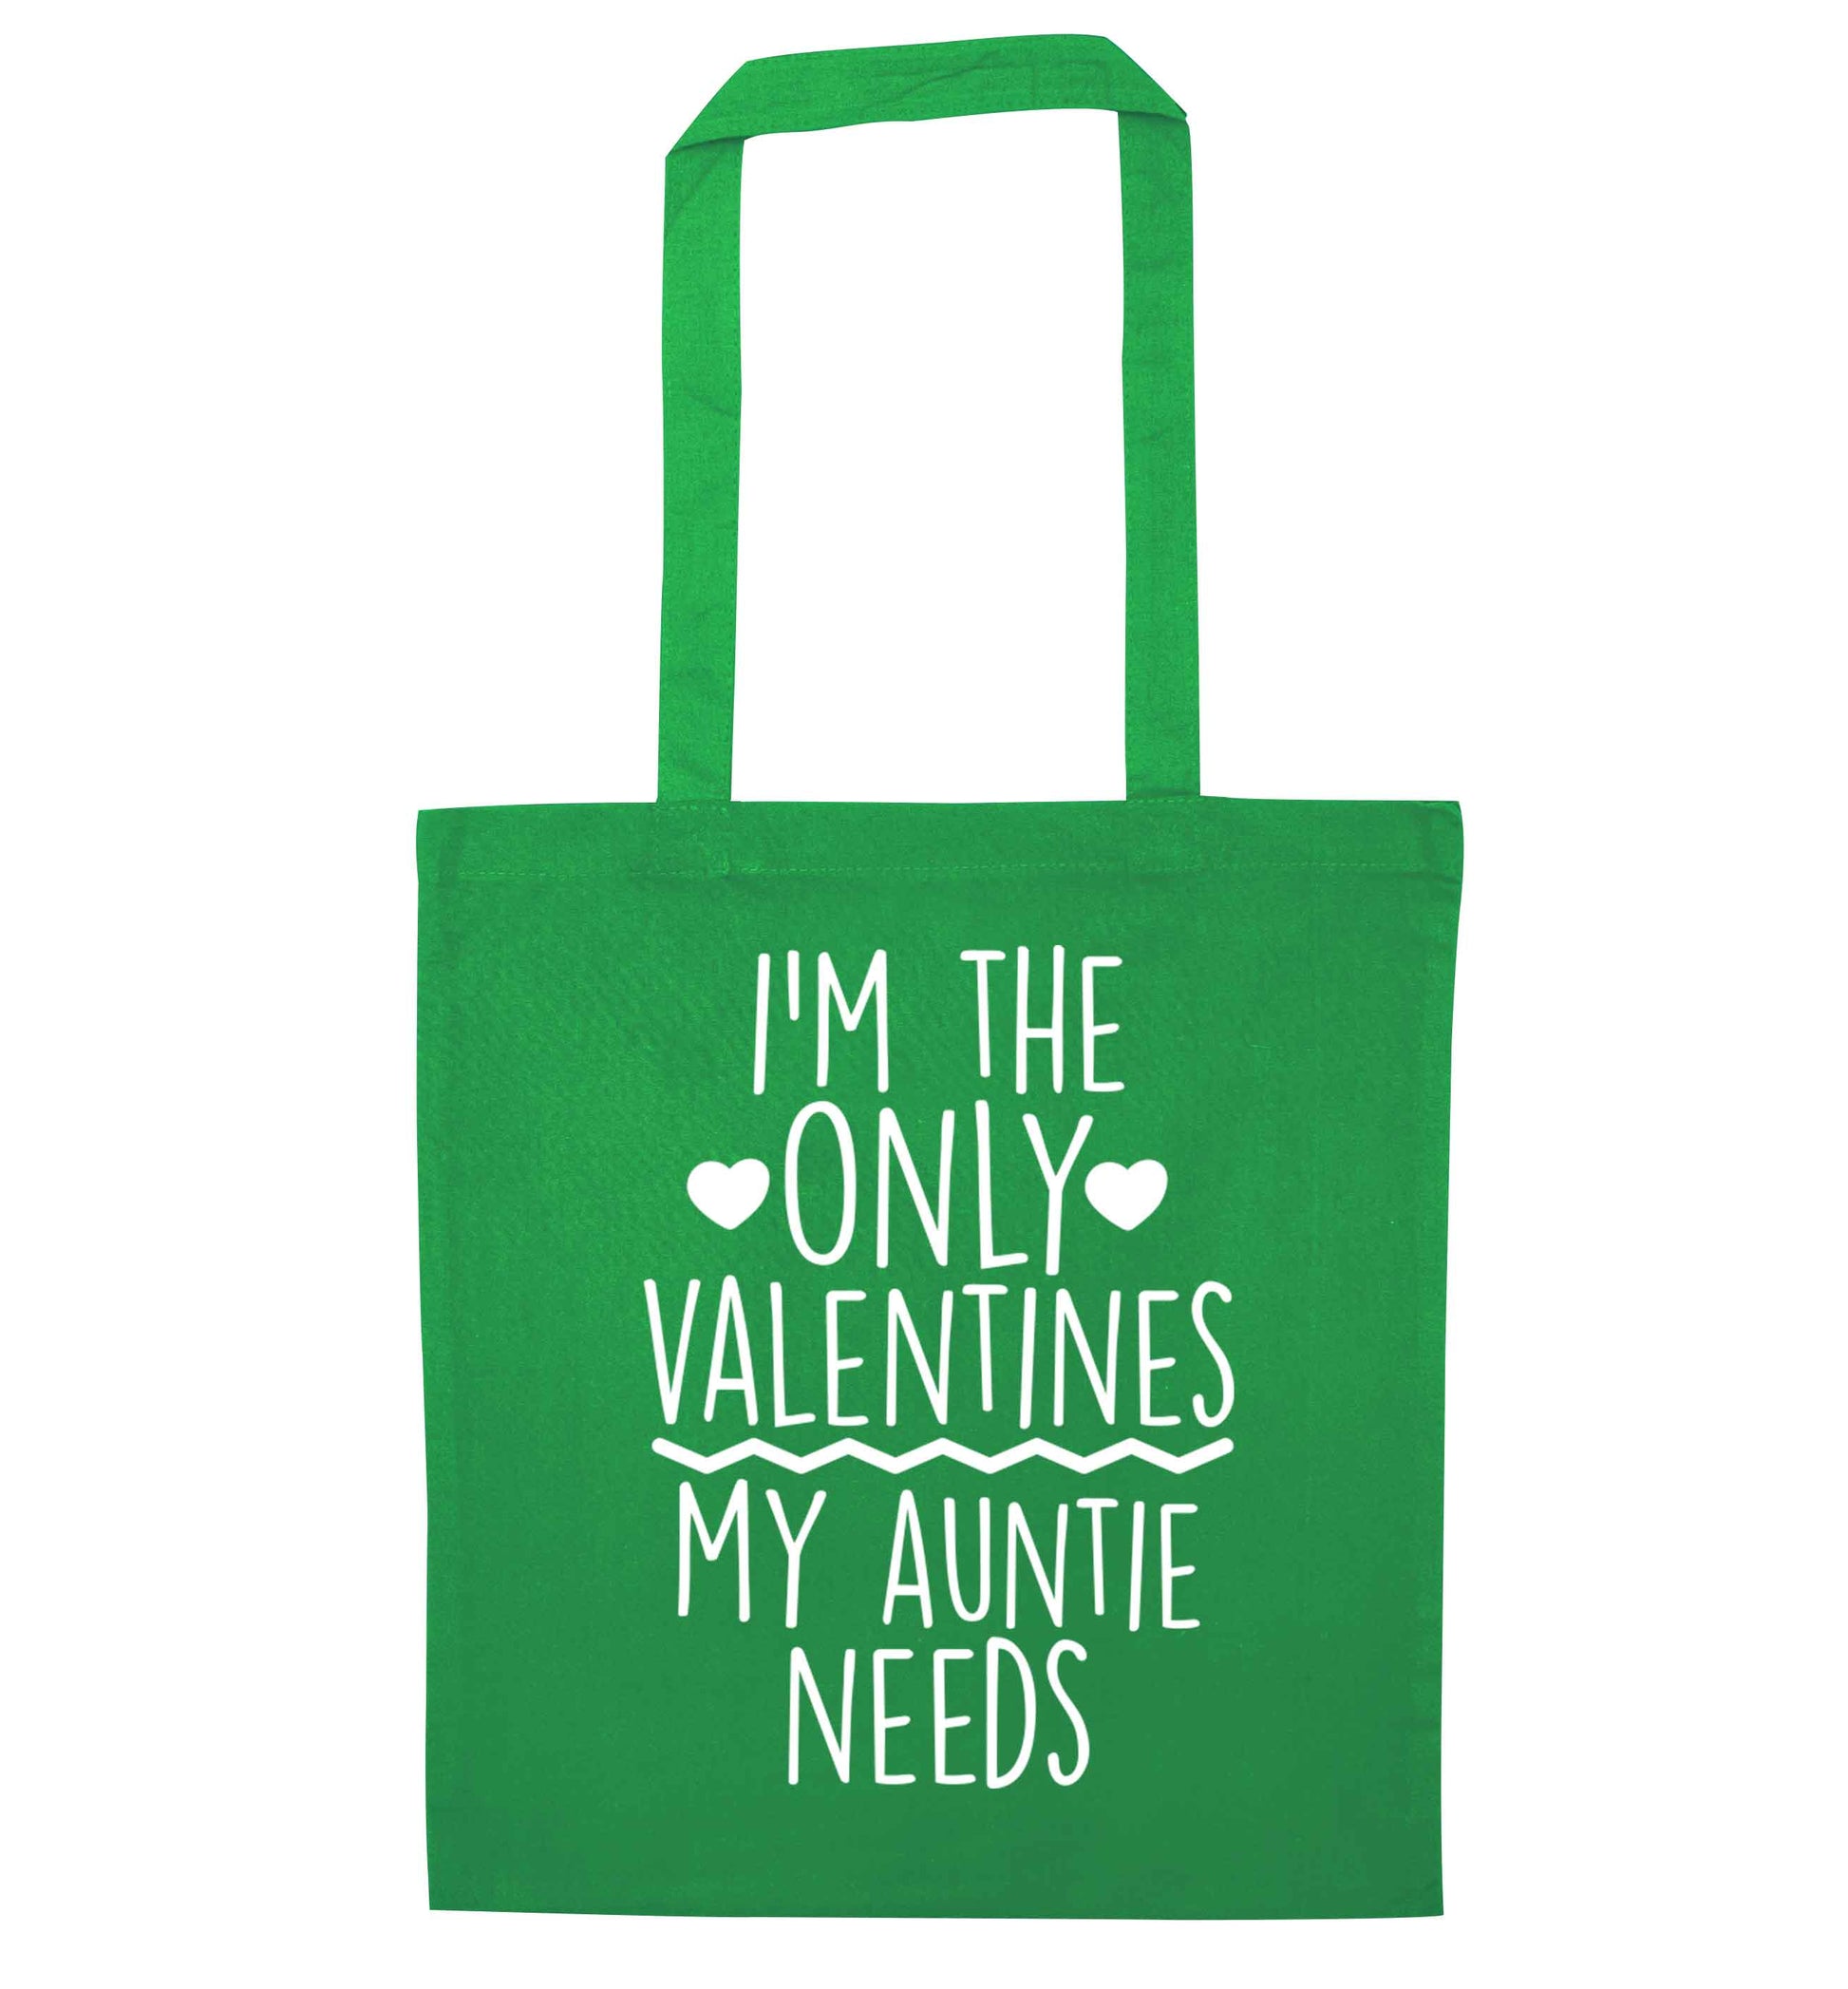 I'm the only valentines my auntie needs green tote bag